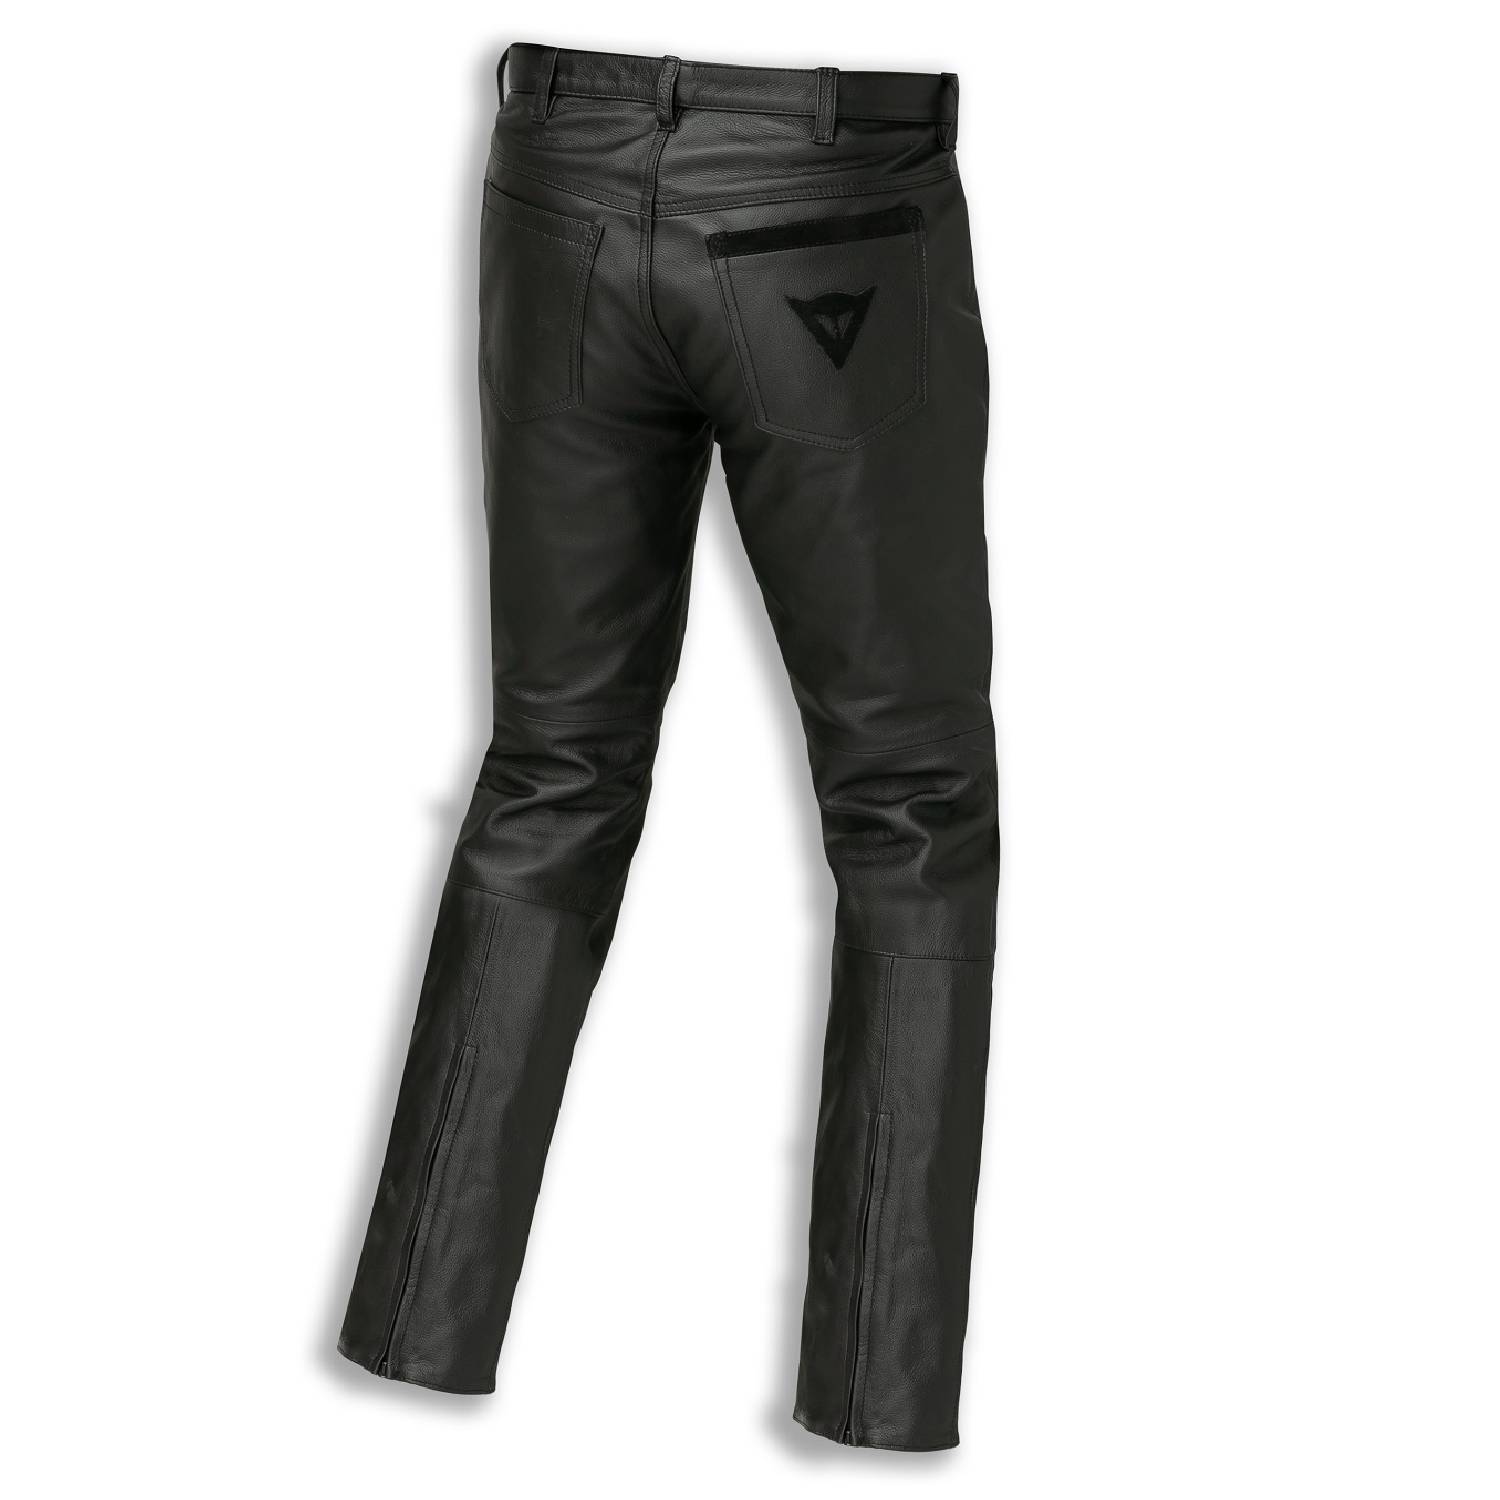 Dainese ダイネーゼ　PONY3 PERF LEATHER PANTS正規店購入品